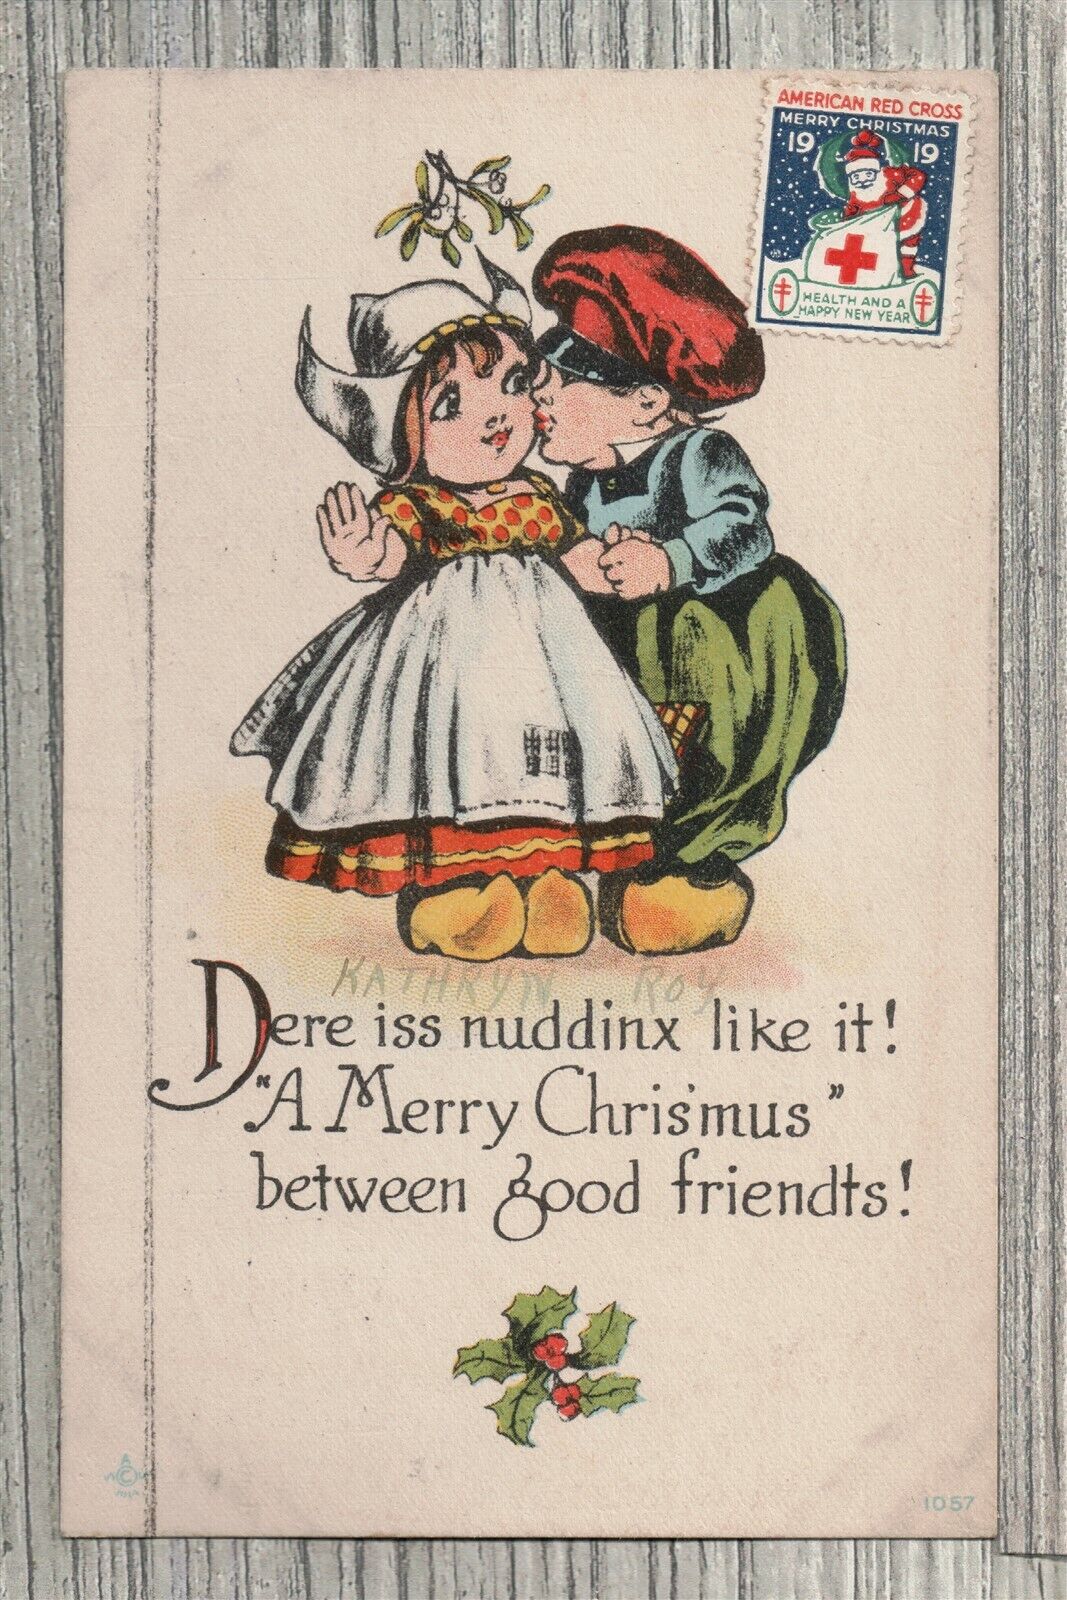 1919 Christmas Postcard-Boy Kissing Girl-Dutch Outfits-Wooden Shoes